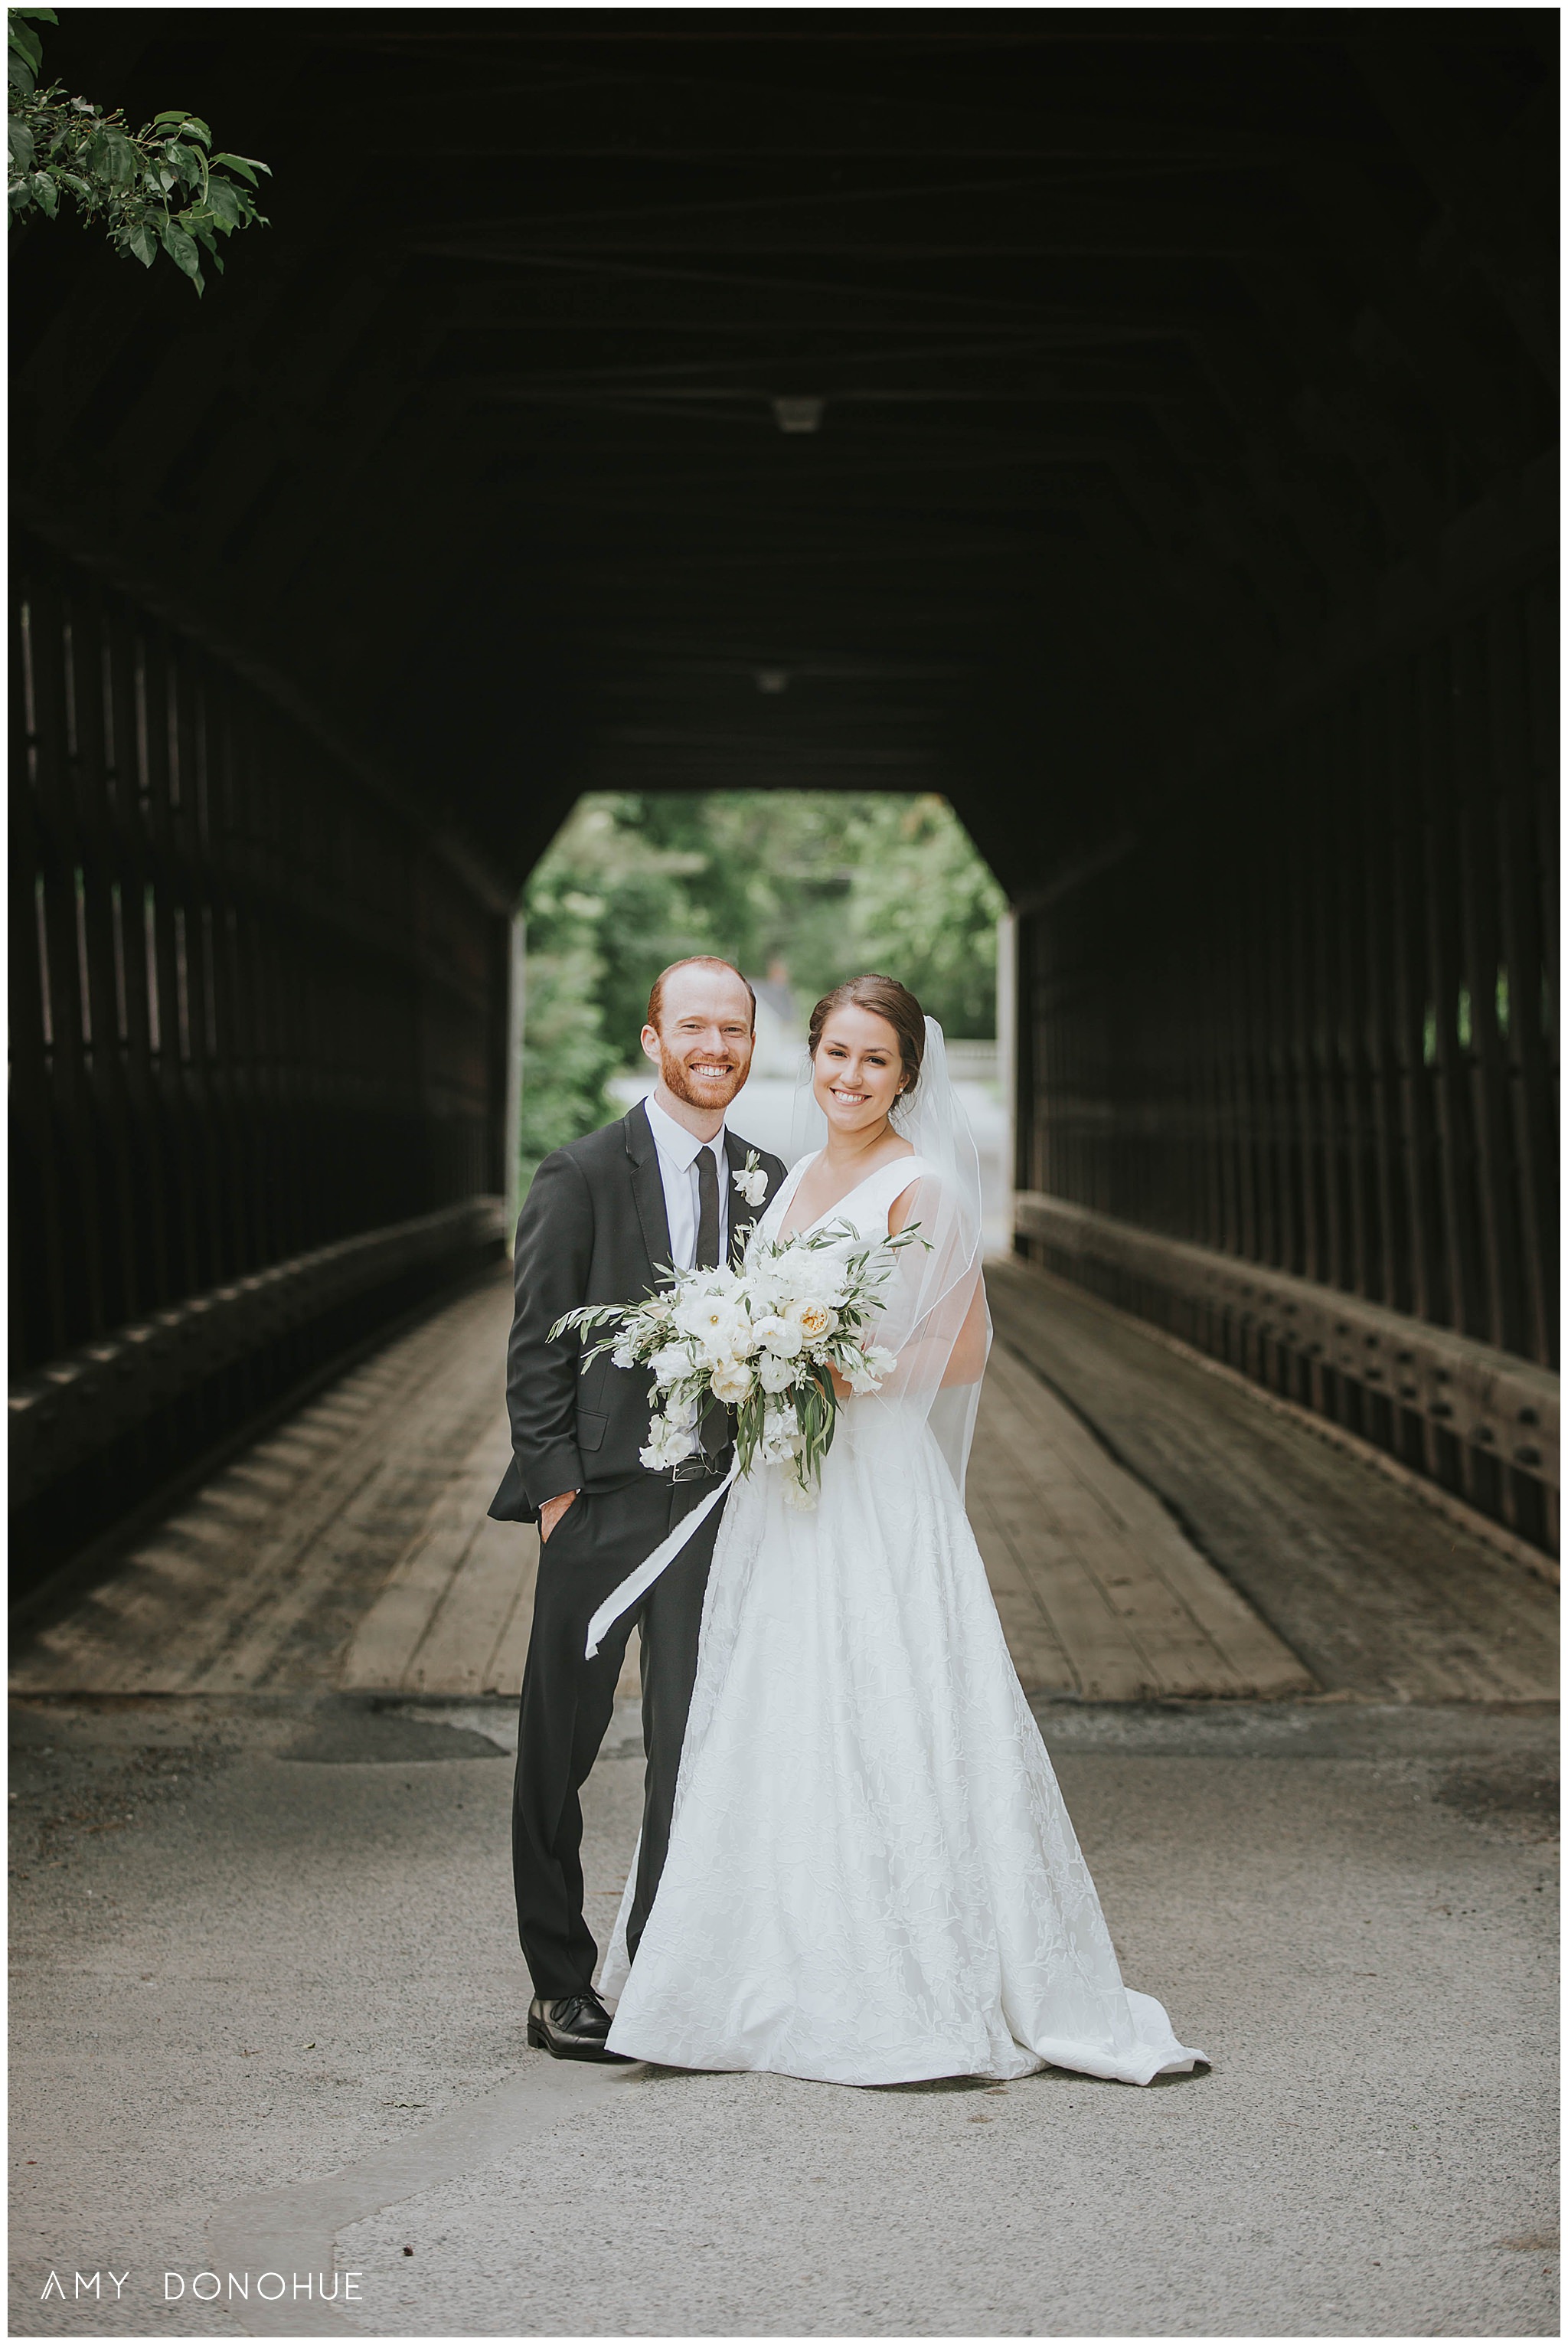 Bride and Groom portraits at the Covered Bridge in Woodstock Vermont